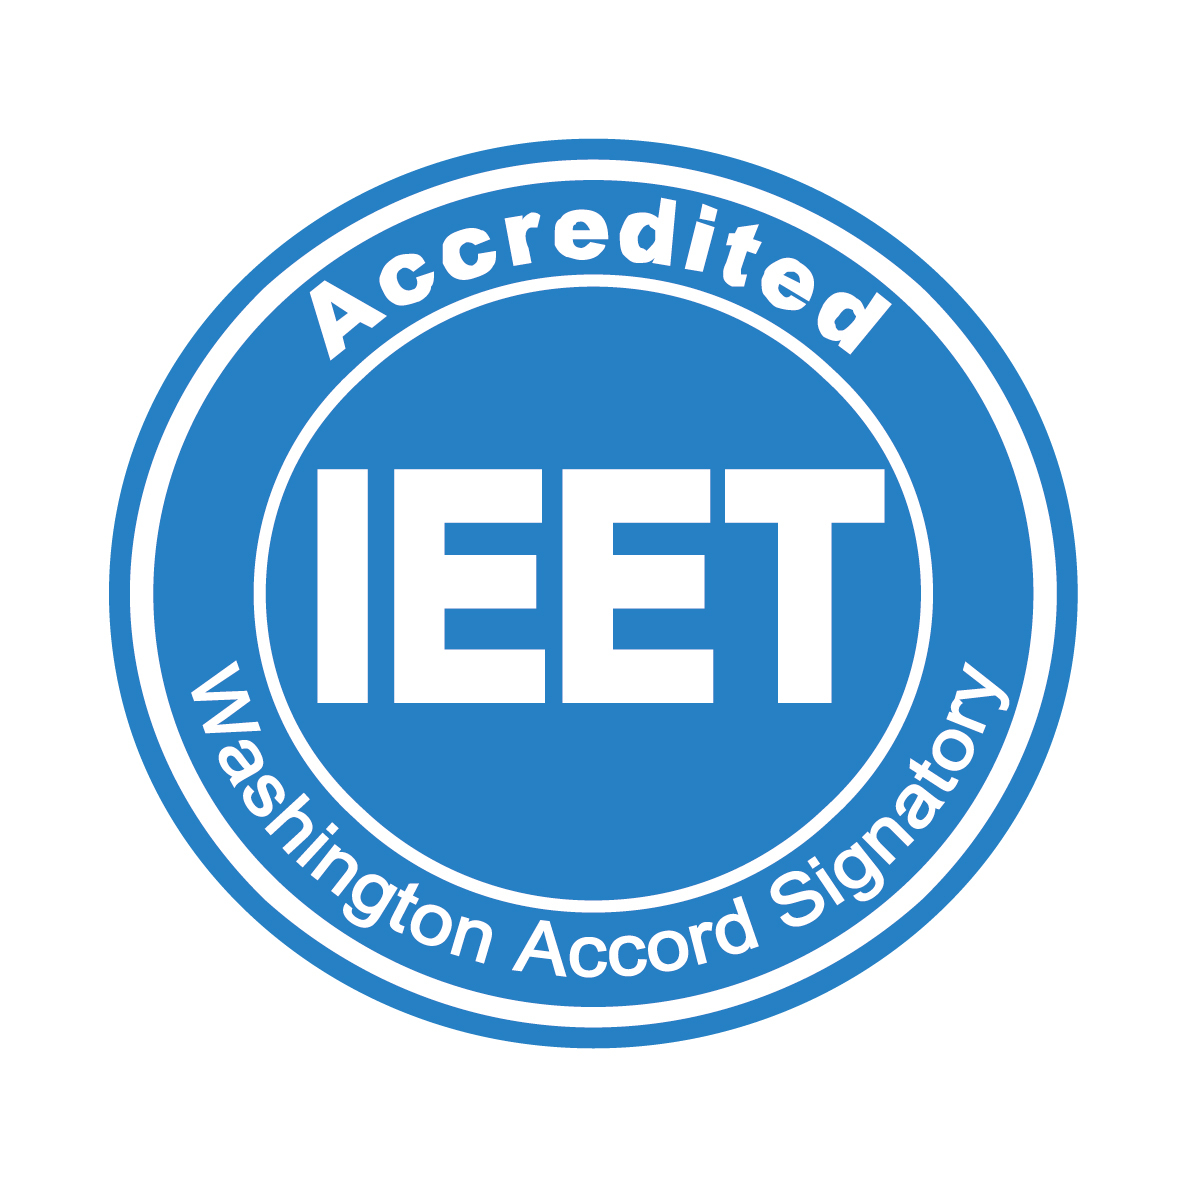 Accredited by IEET under Washington Accord